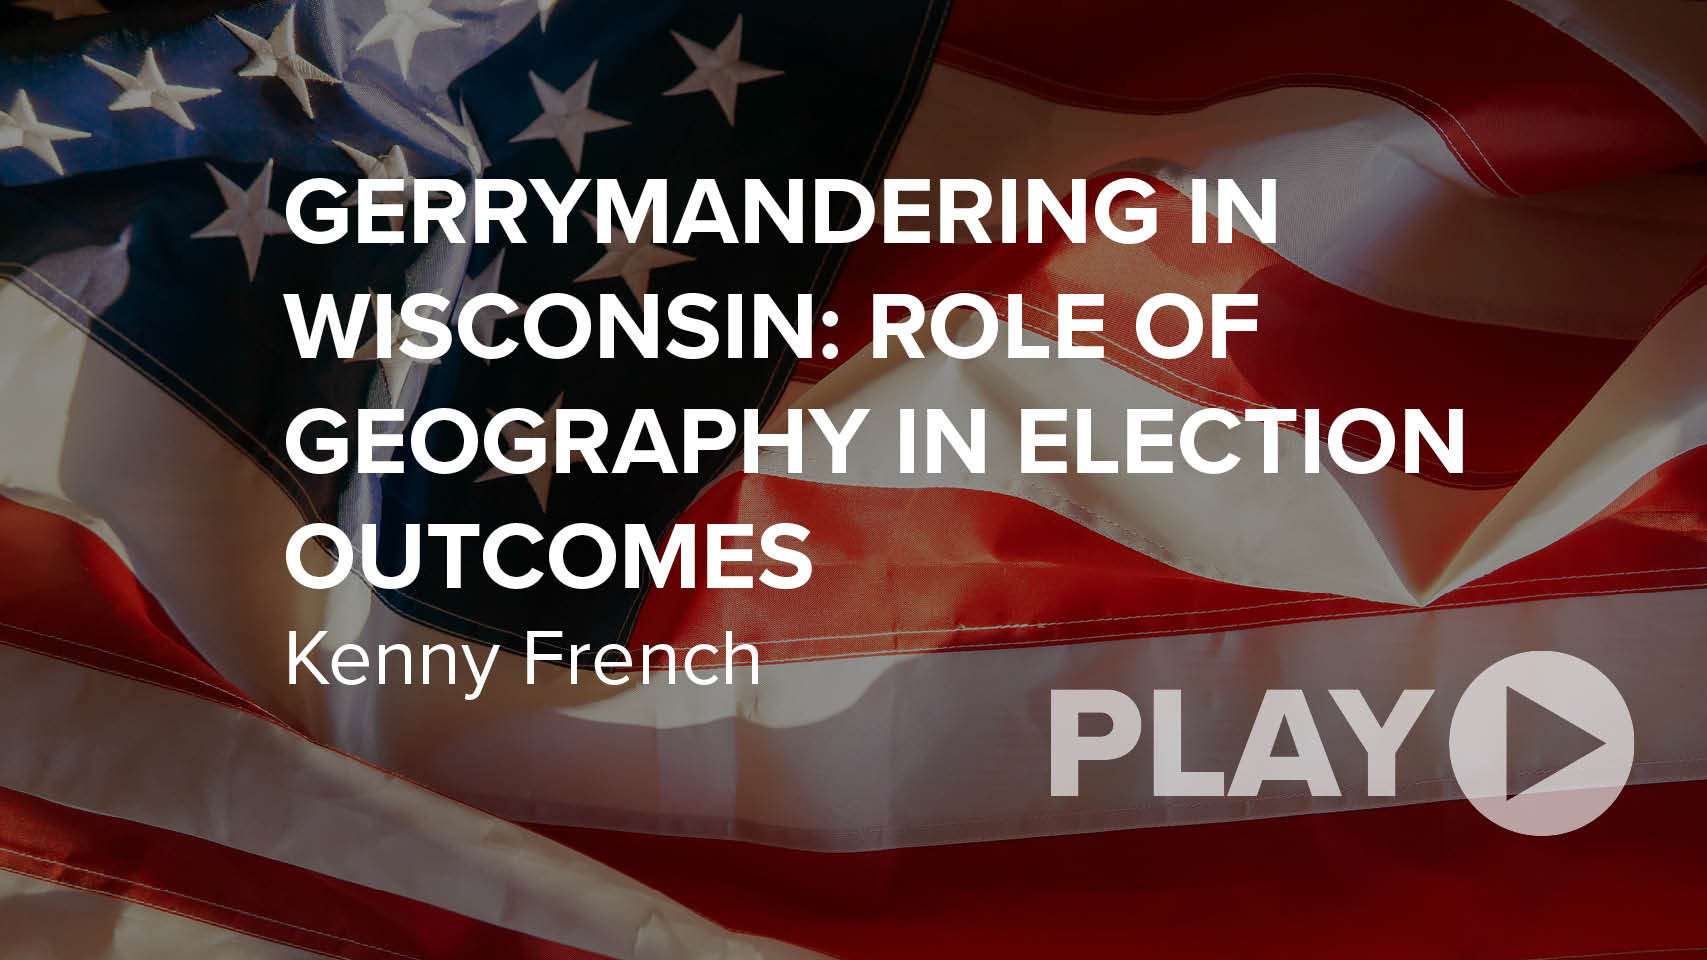 Gerrymandering in Wisconsin: Role of Geography in Election Outcomes